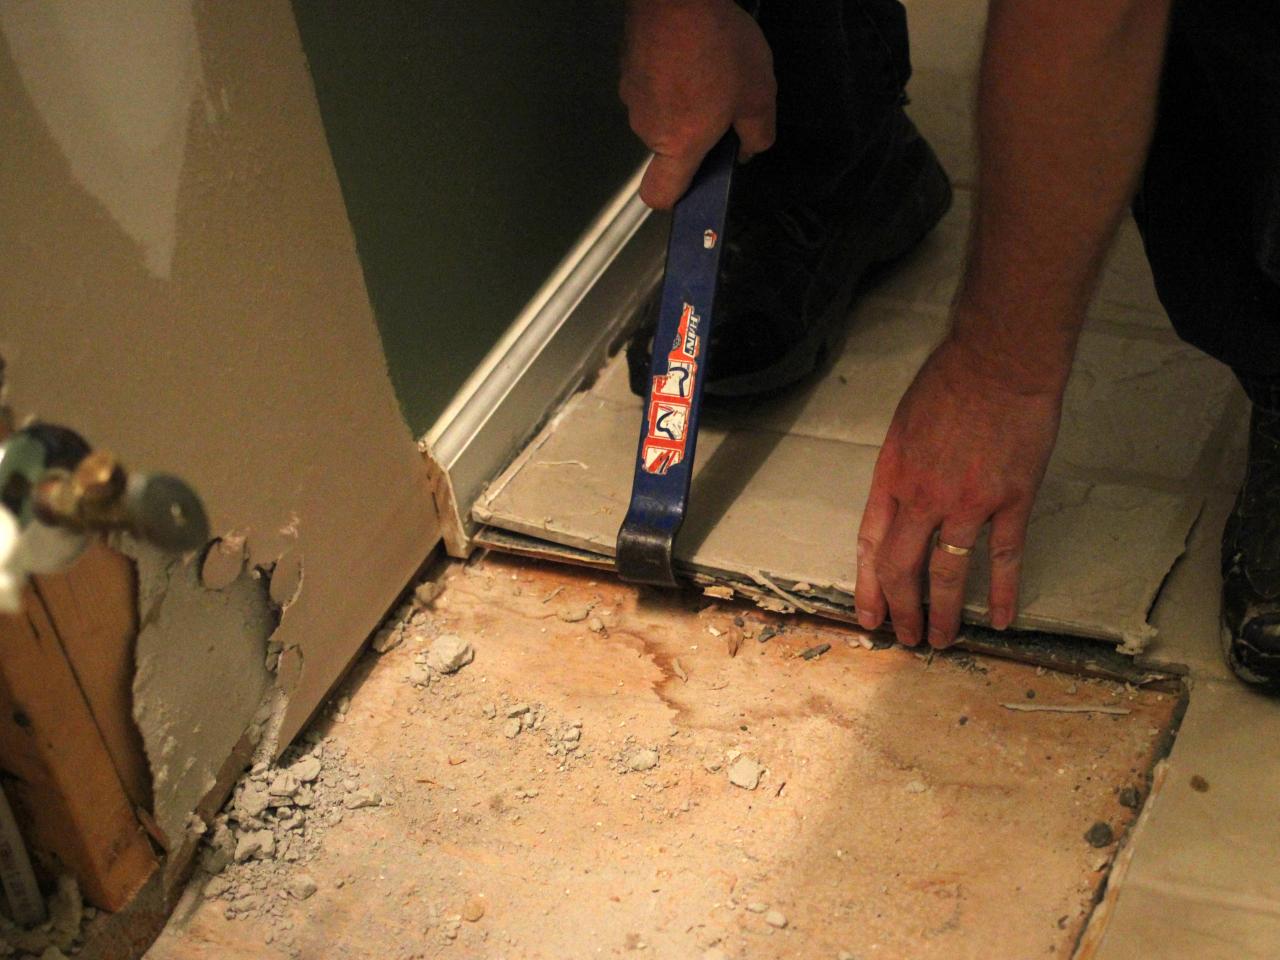 How To Remove A Tile Floor, How To Remove And Retile Bathroom Floor